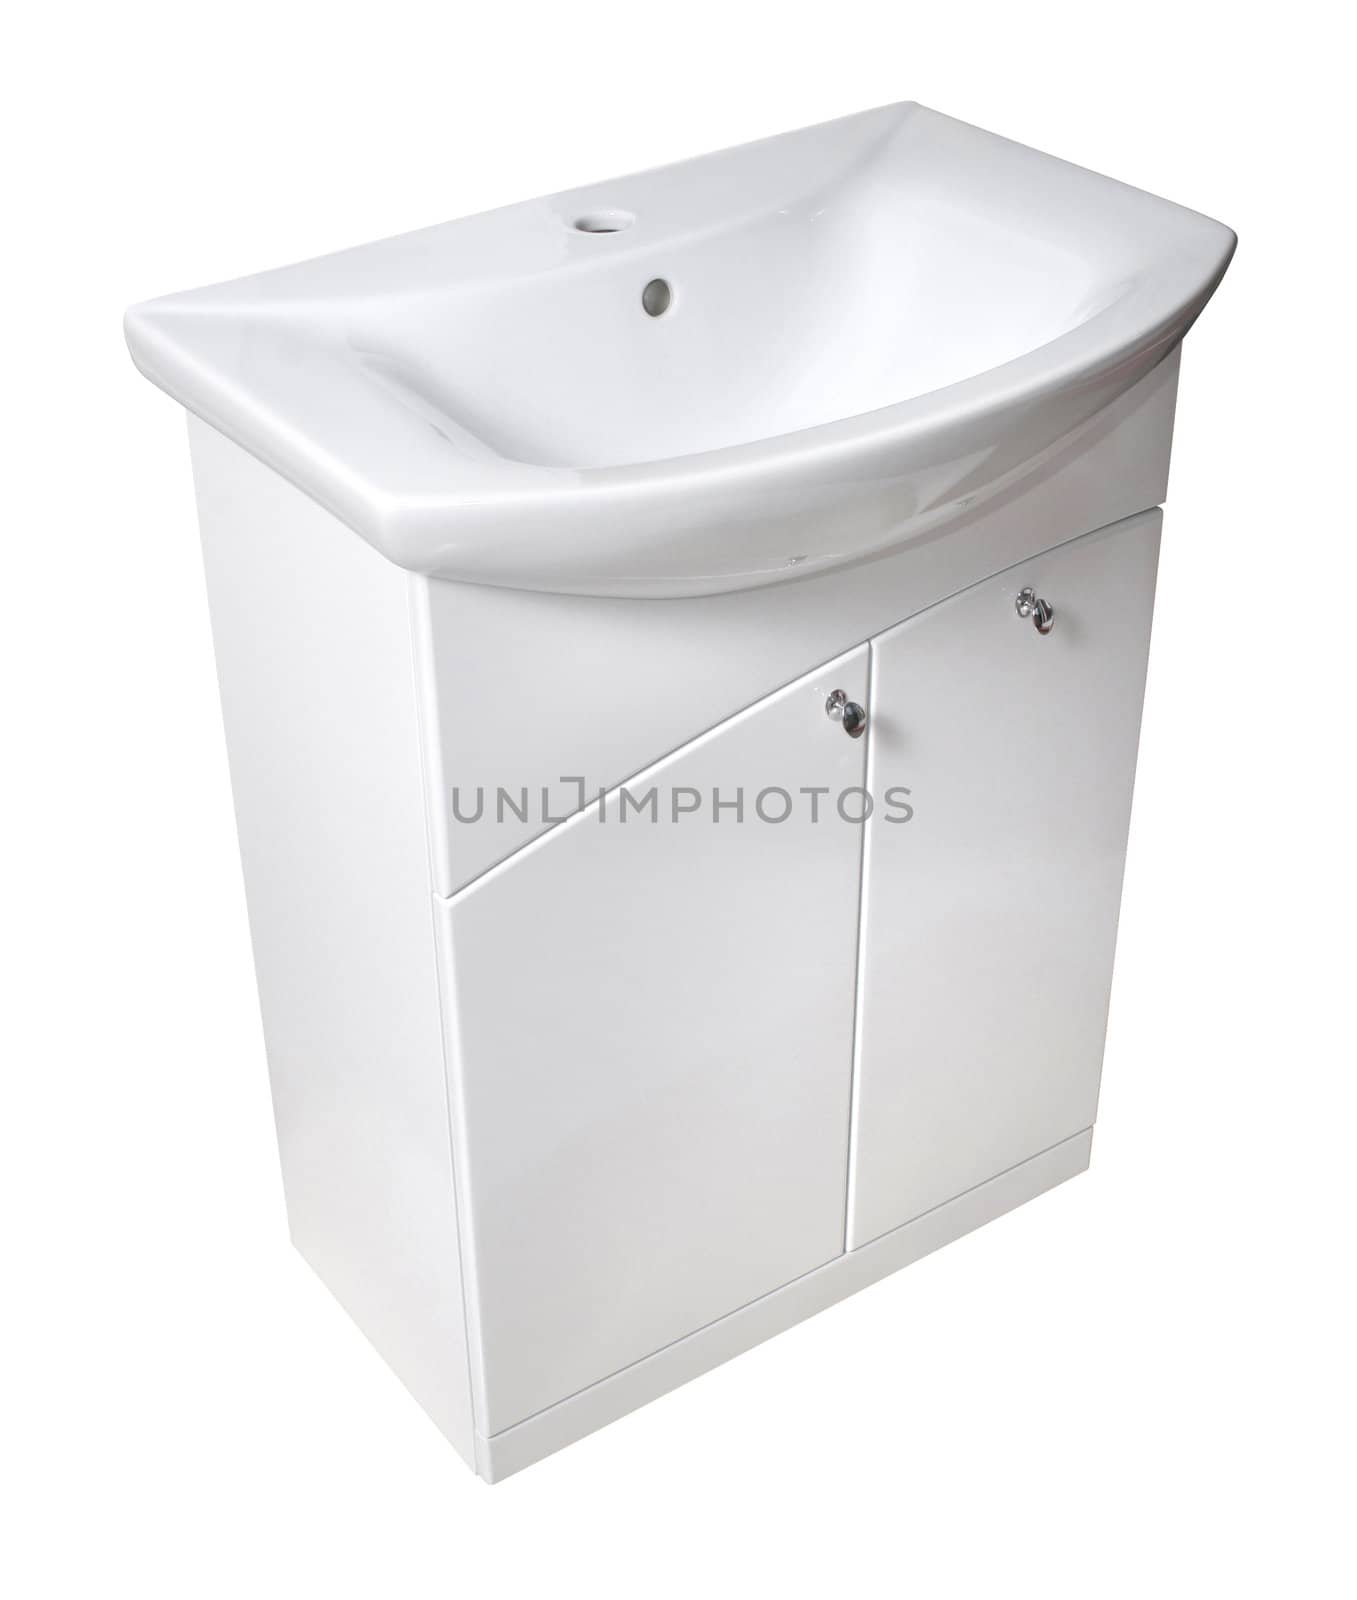 Basin and cabinet. File includes clipping path for easy background removing